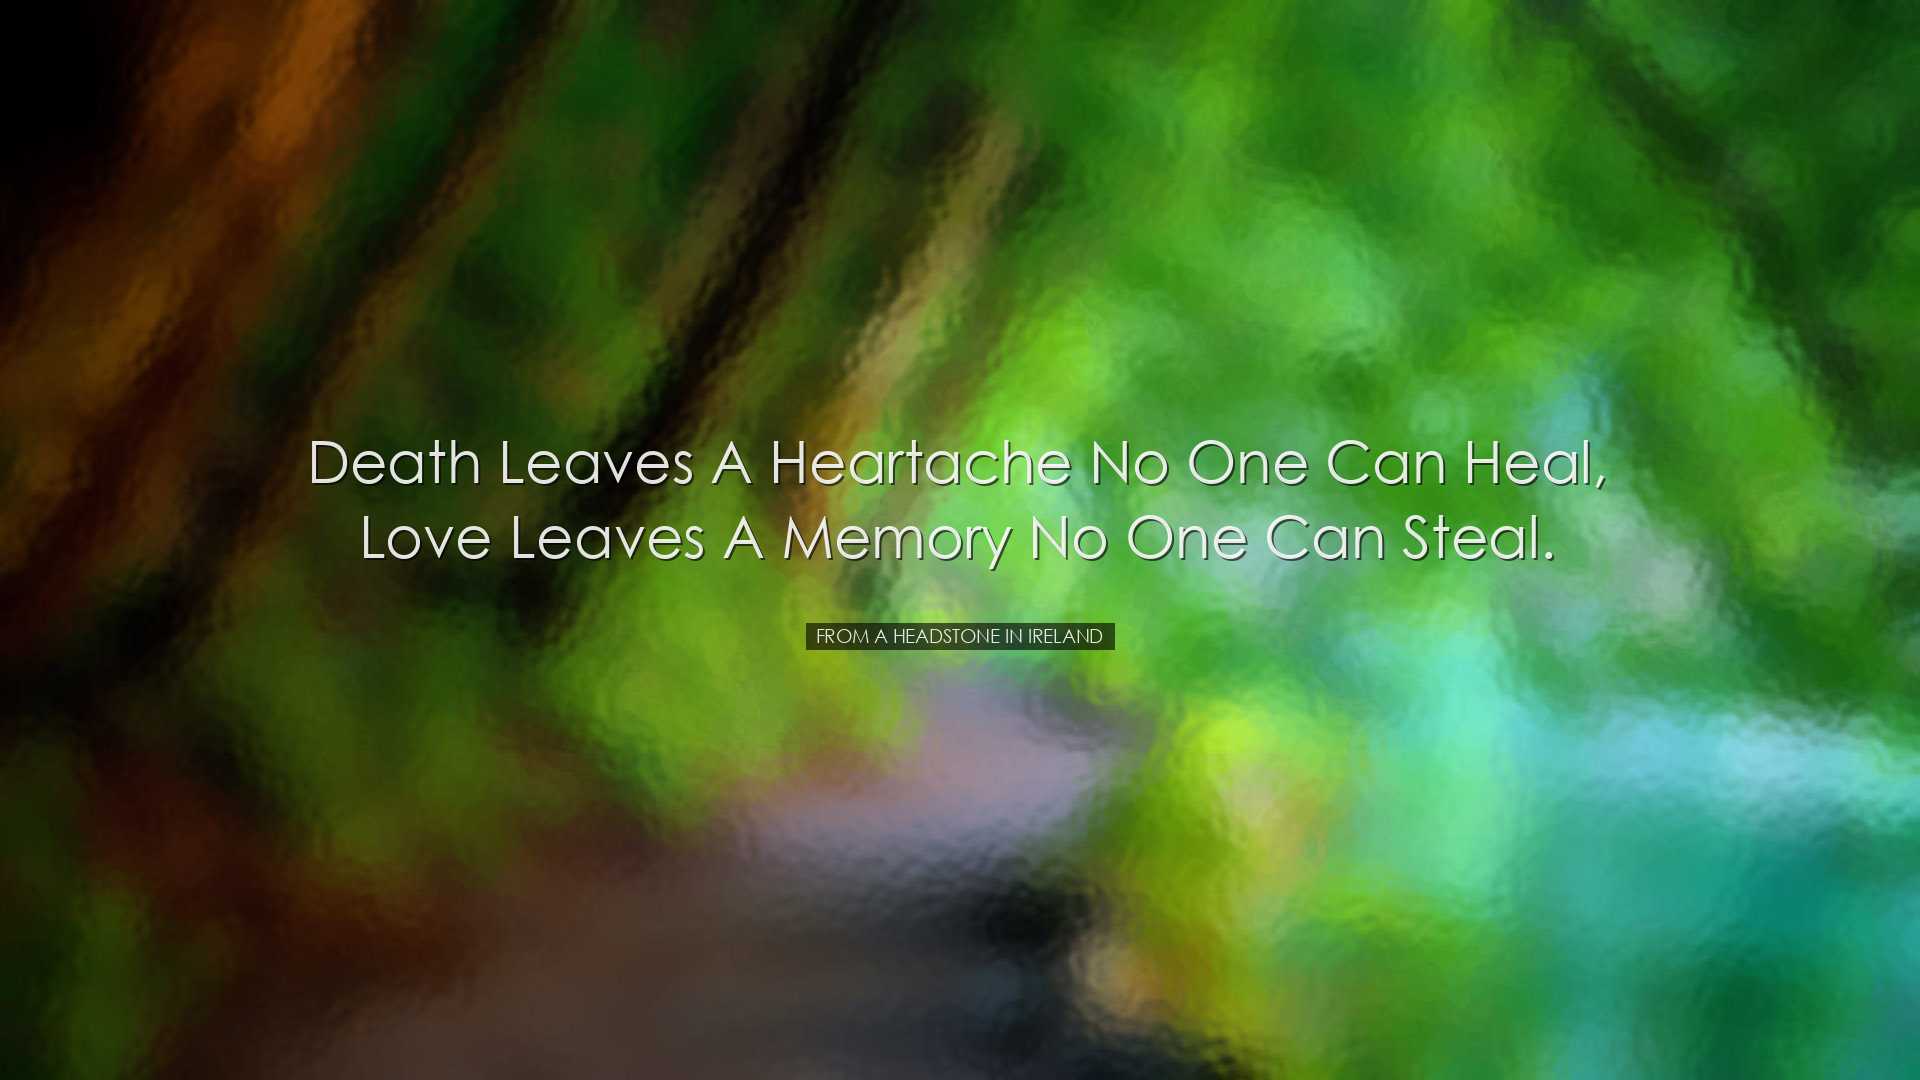 Death leaves a heartache no one can heal, love leaves a memory no